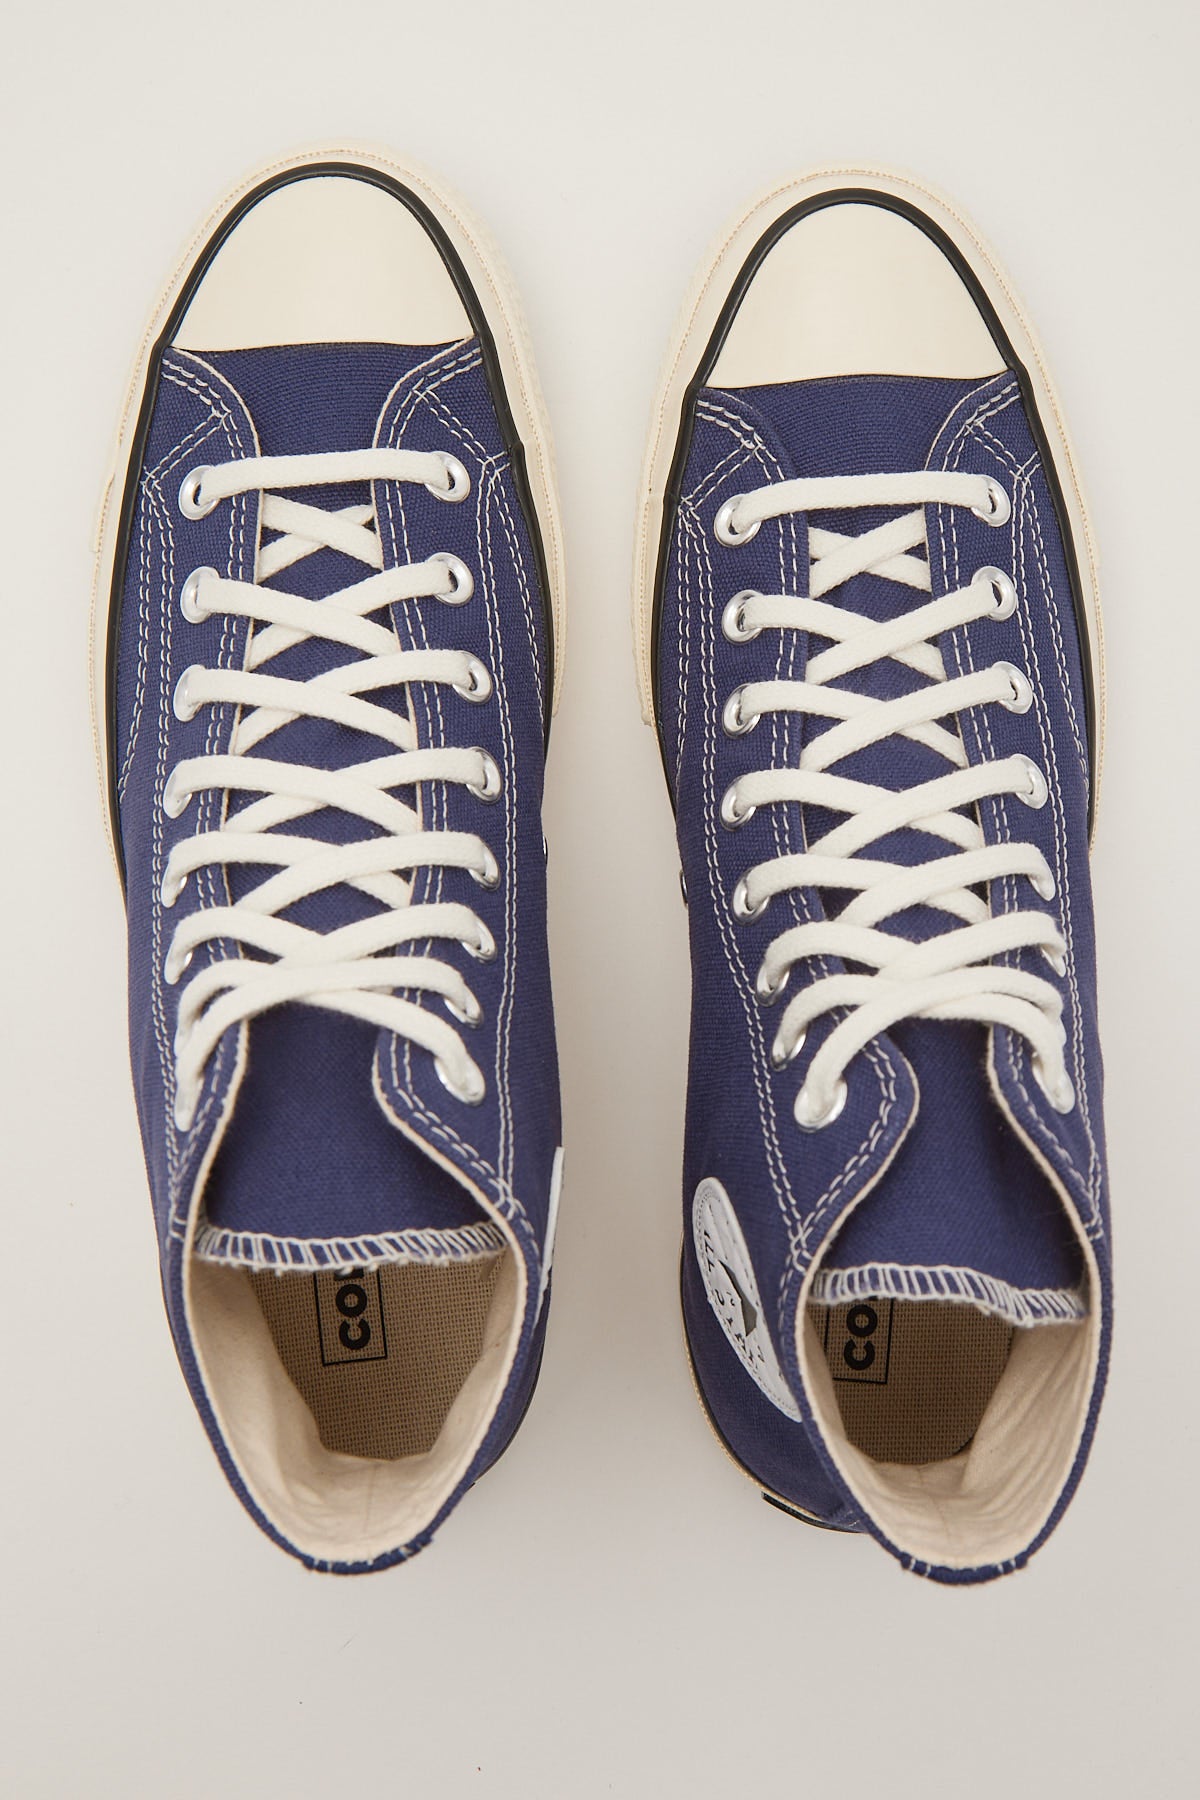 Converse Chuck 70s Unchatered Waters